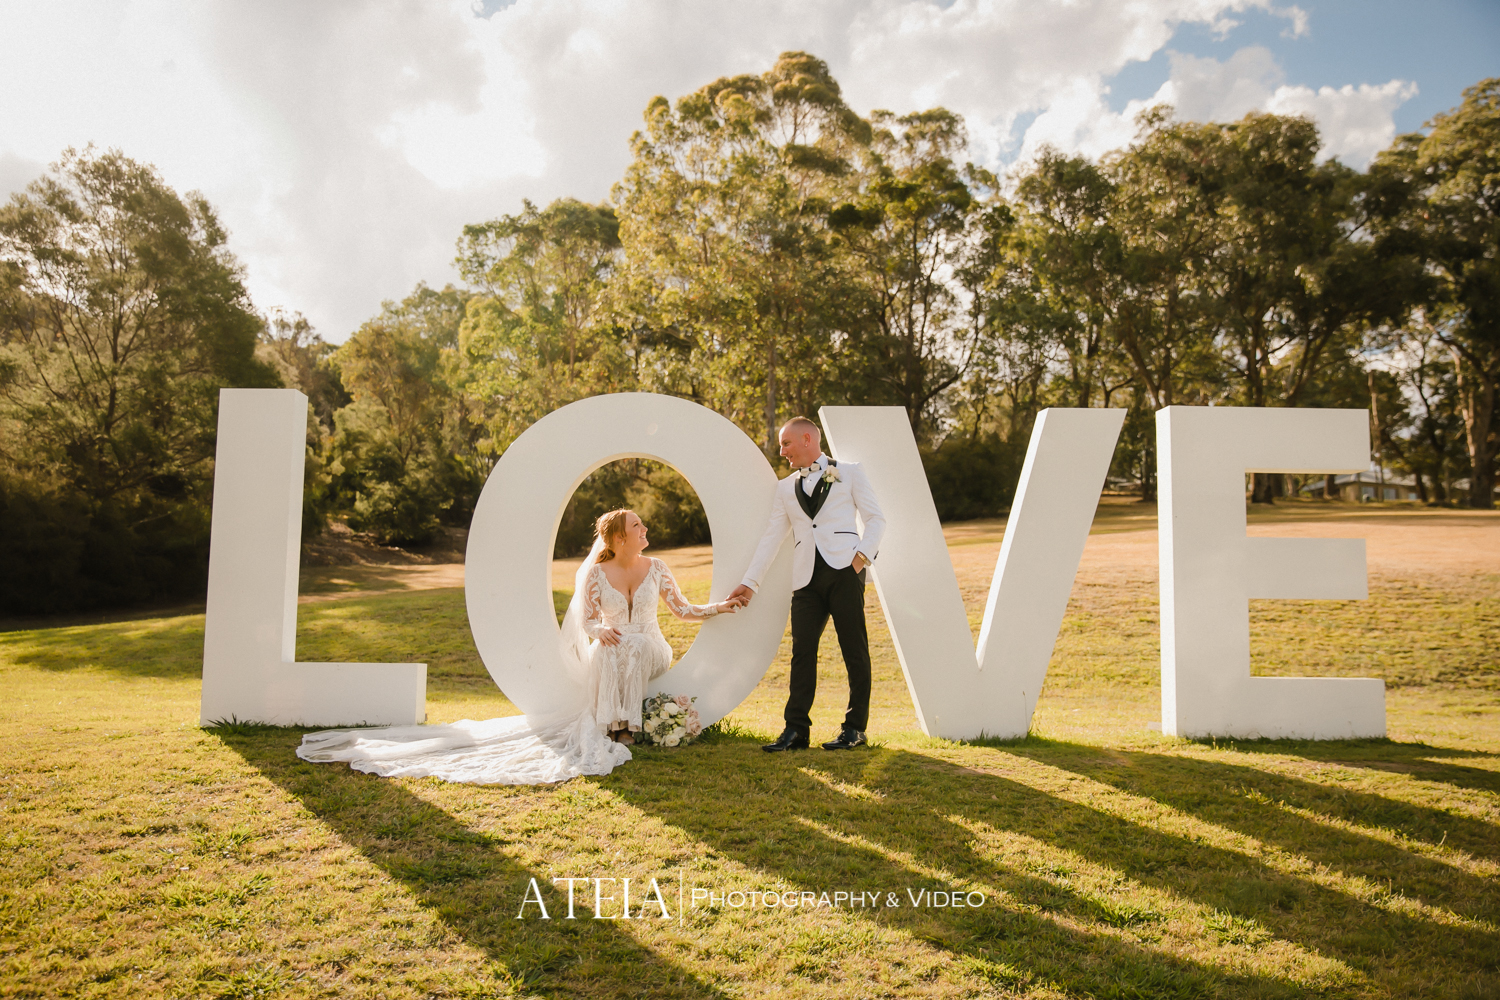 , BramLeigh Estate Wedding Photography Melbourne by ATEIA Photography &#038; Video